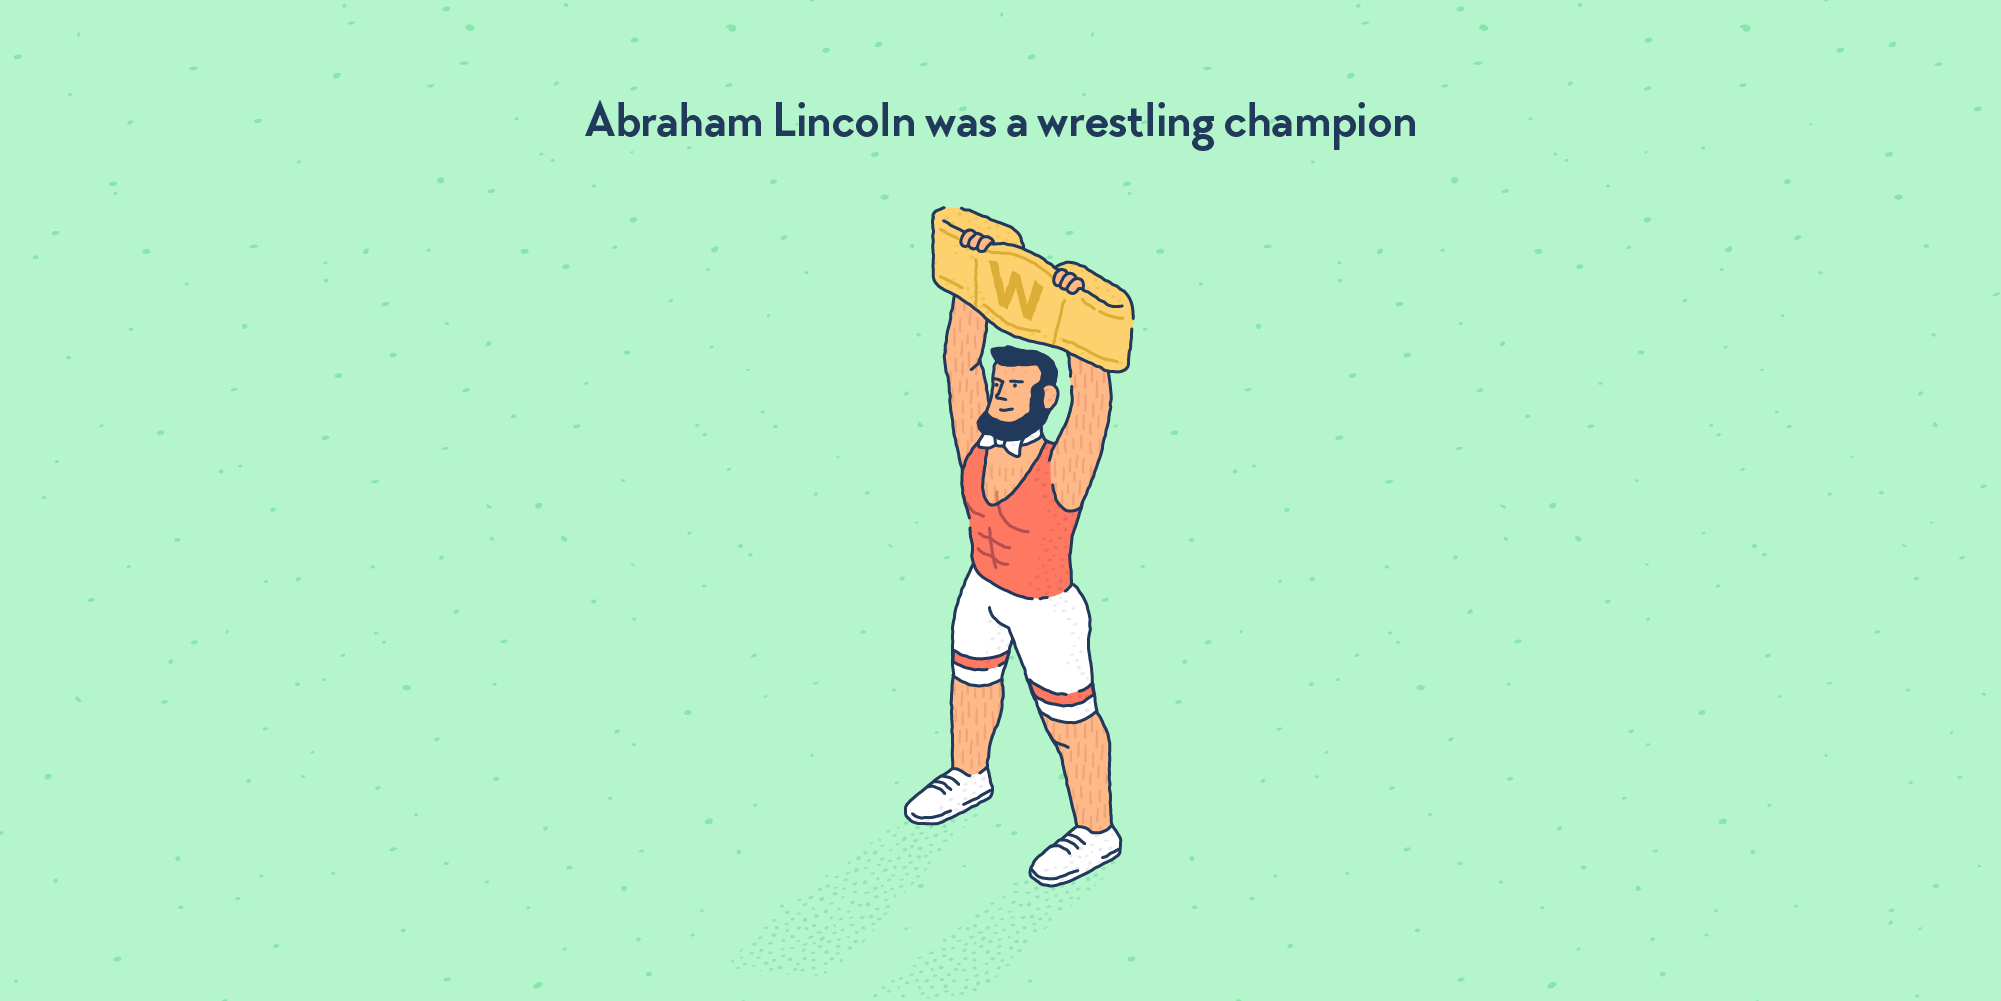 A young Abraham Lincolnm holding the trophy banner of a wrestling championship.